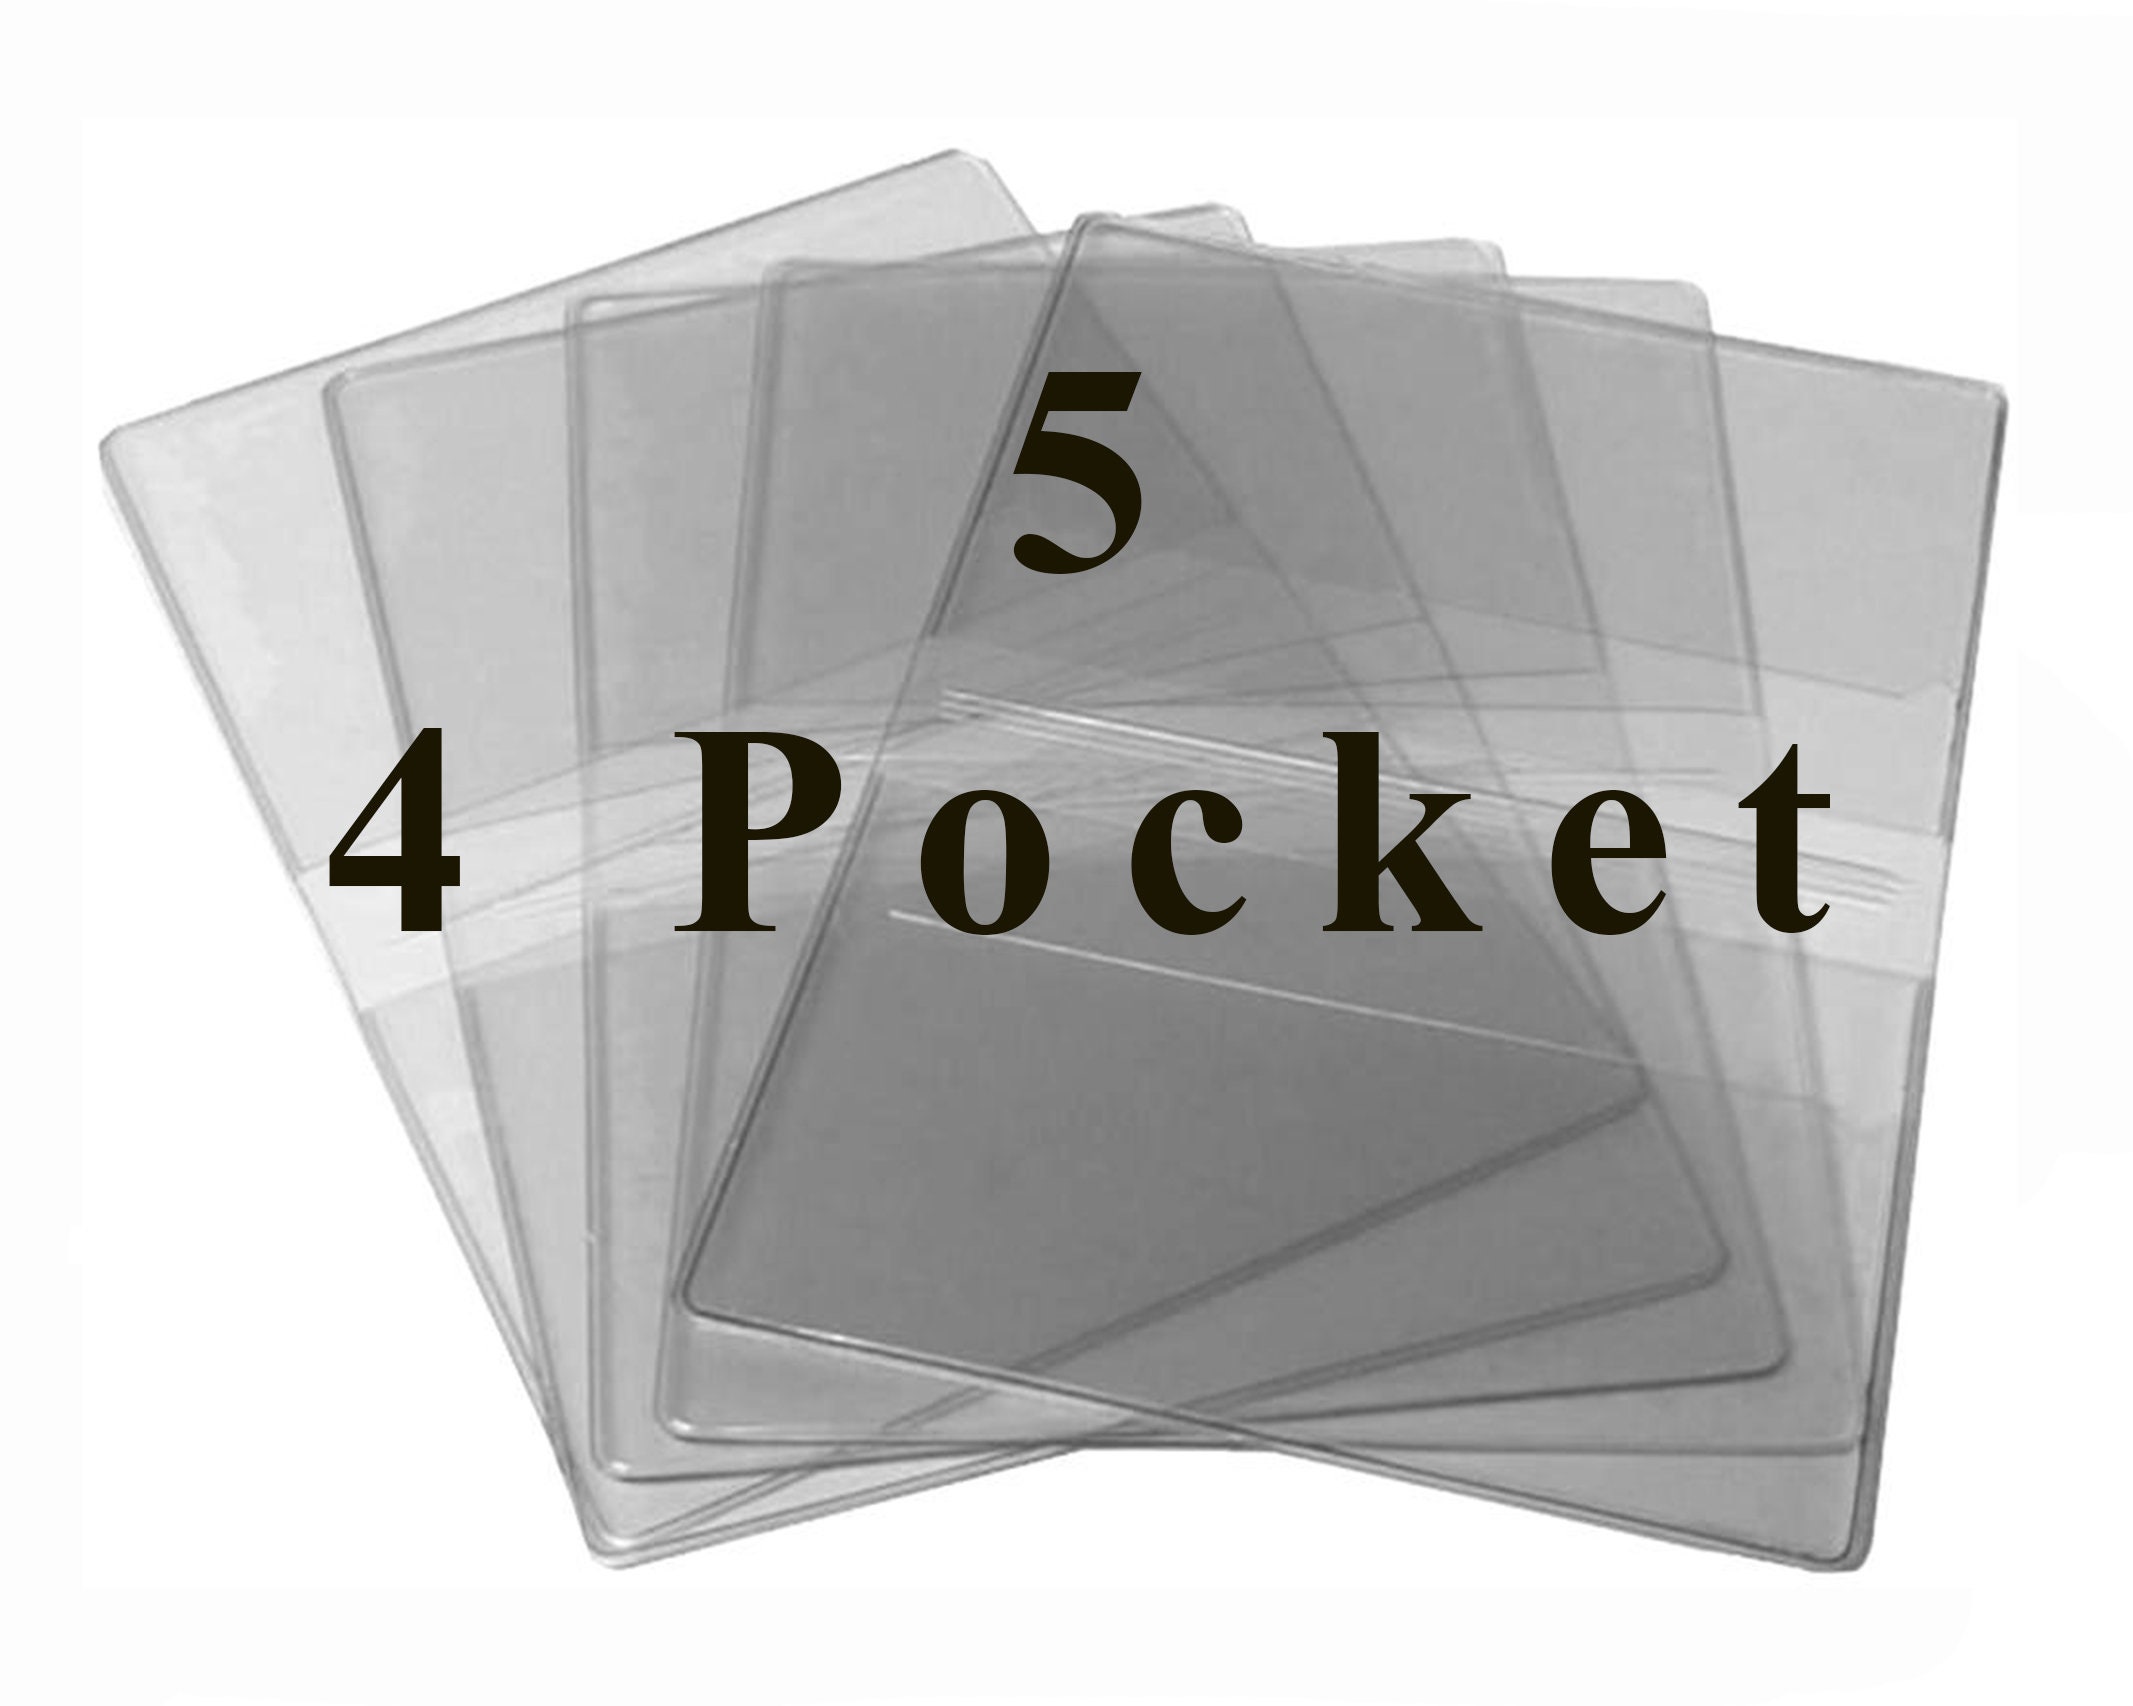 4x6 Photo Sleeves Archival Easy Mount Self Adhesive One SET of 24 clear  pockets A4 John Porter Scrapbooking